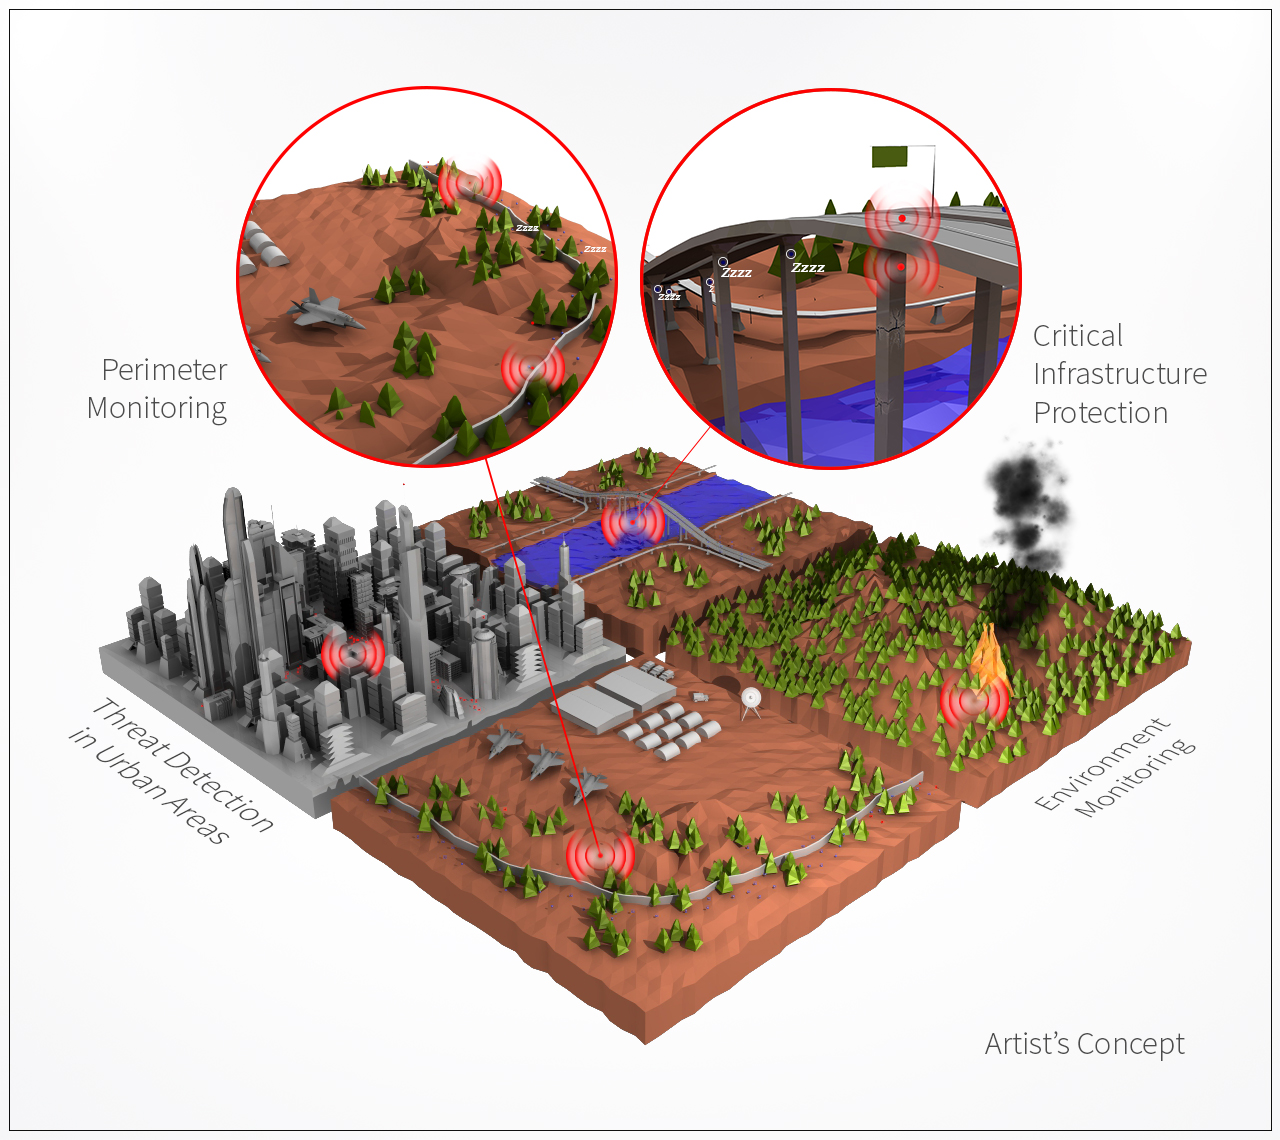 This image illustrates how N-ZERO-equipped sensors could cut reliance on active power in various environments including critical infrastructure protection, threat detection in an urban area, forest fire detection and perimeter monitoring. The image highlights critical infrastructure in particular to show that these wireless sensors could help identify cracks and prevent further serious damage or danger. The wireless sensors could then gather the specific data and trigger a separate processor to analyze the data and take appropriate action.